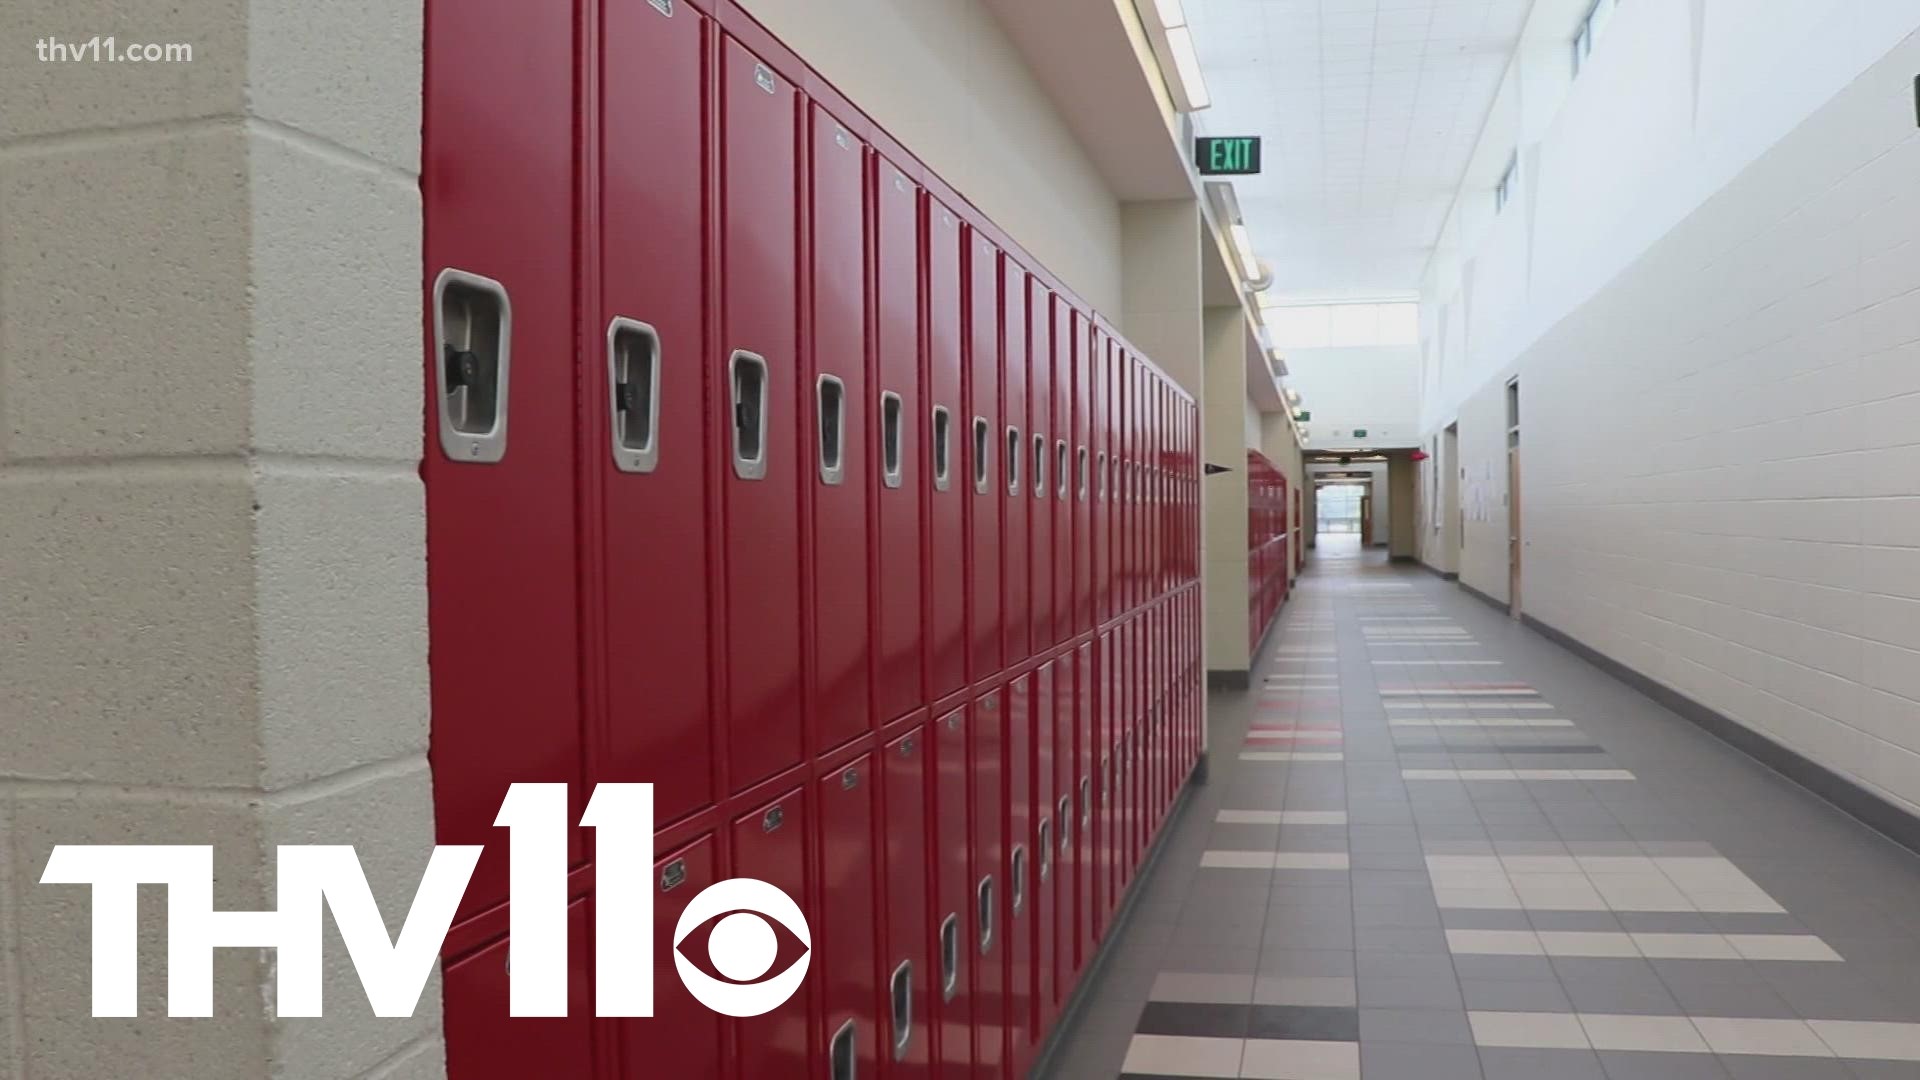 Many parents in Arkansas are wondering if their child is safe while at school. The state is working with the U of A Criminal Justice Institute for school safety.